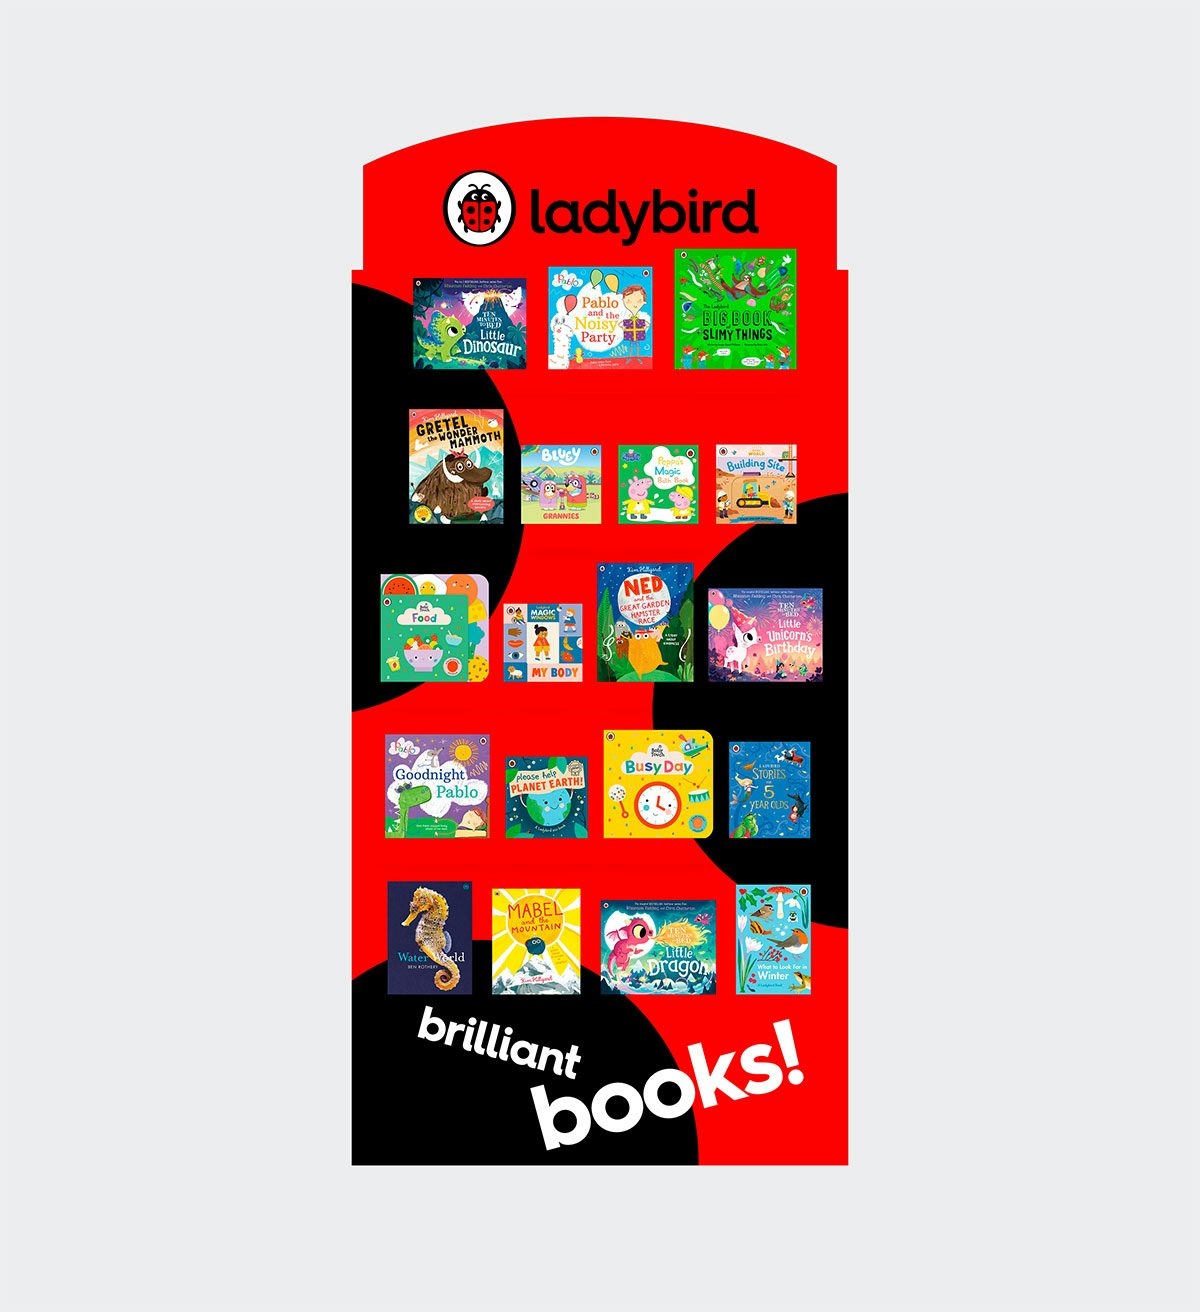 Ladybird point of sale stand with books